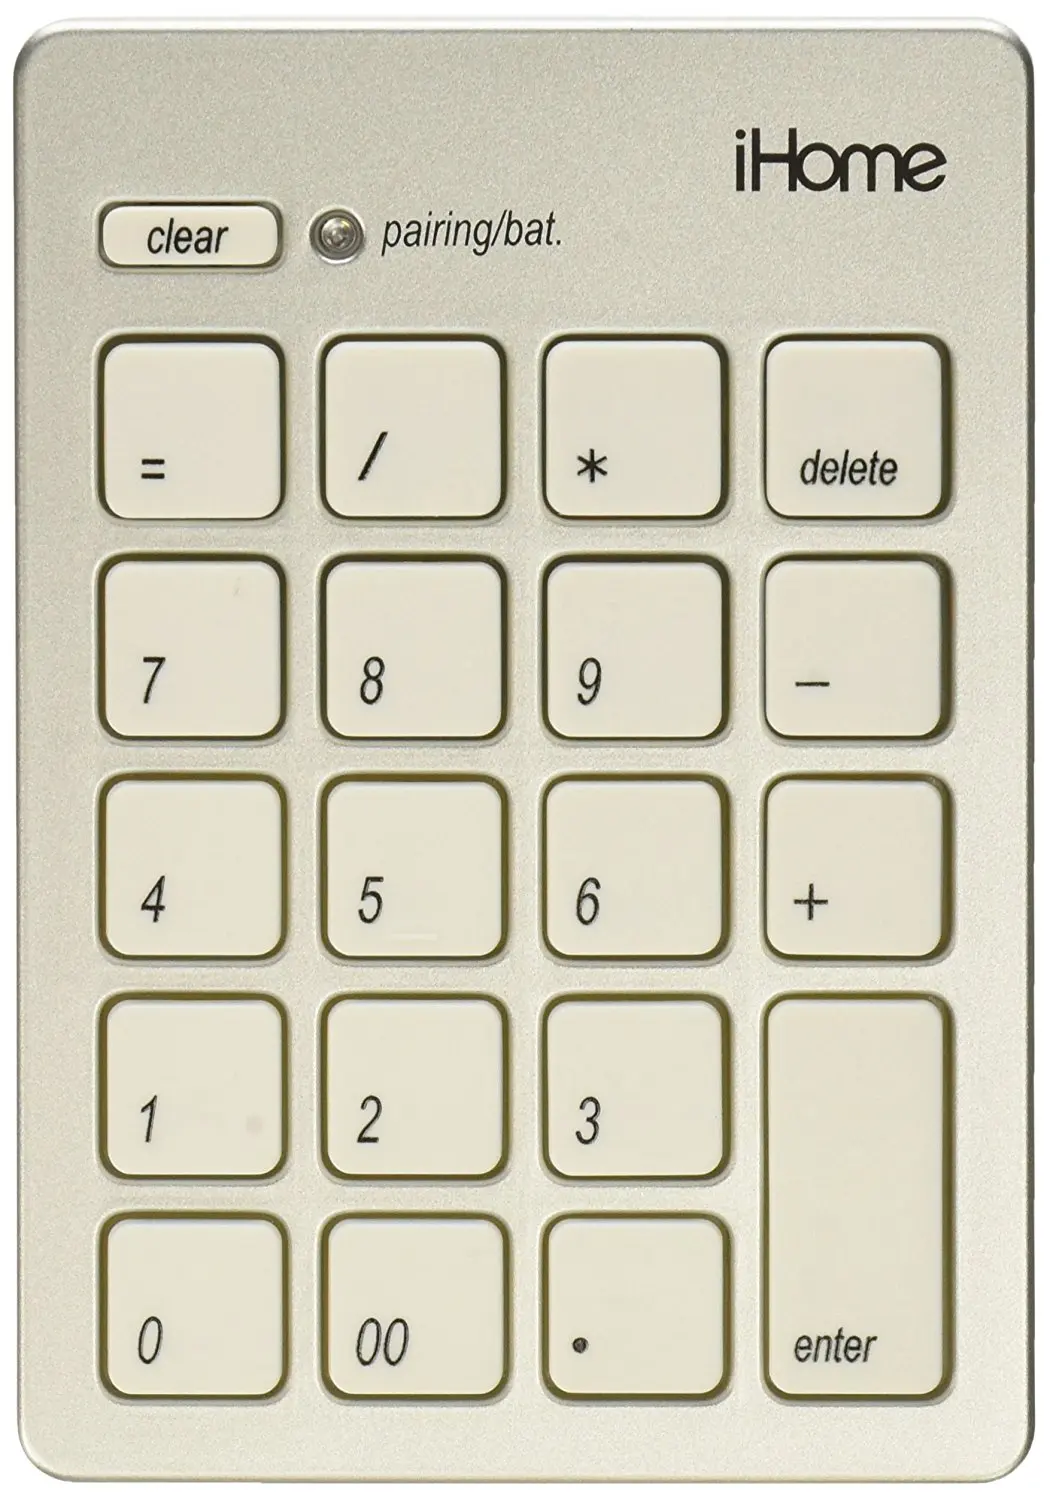 Pairing A Smk Link Bluetooth Calculator Keypad For Mac And Pc-vp6273